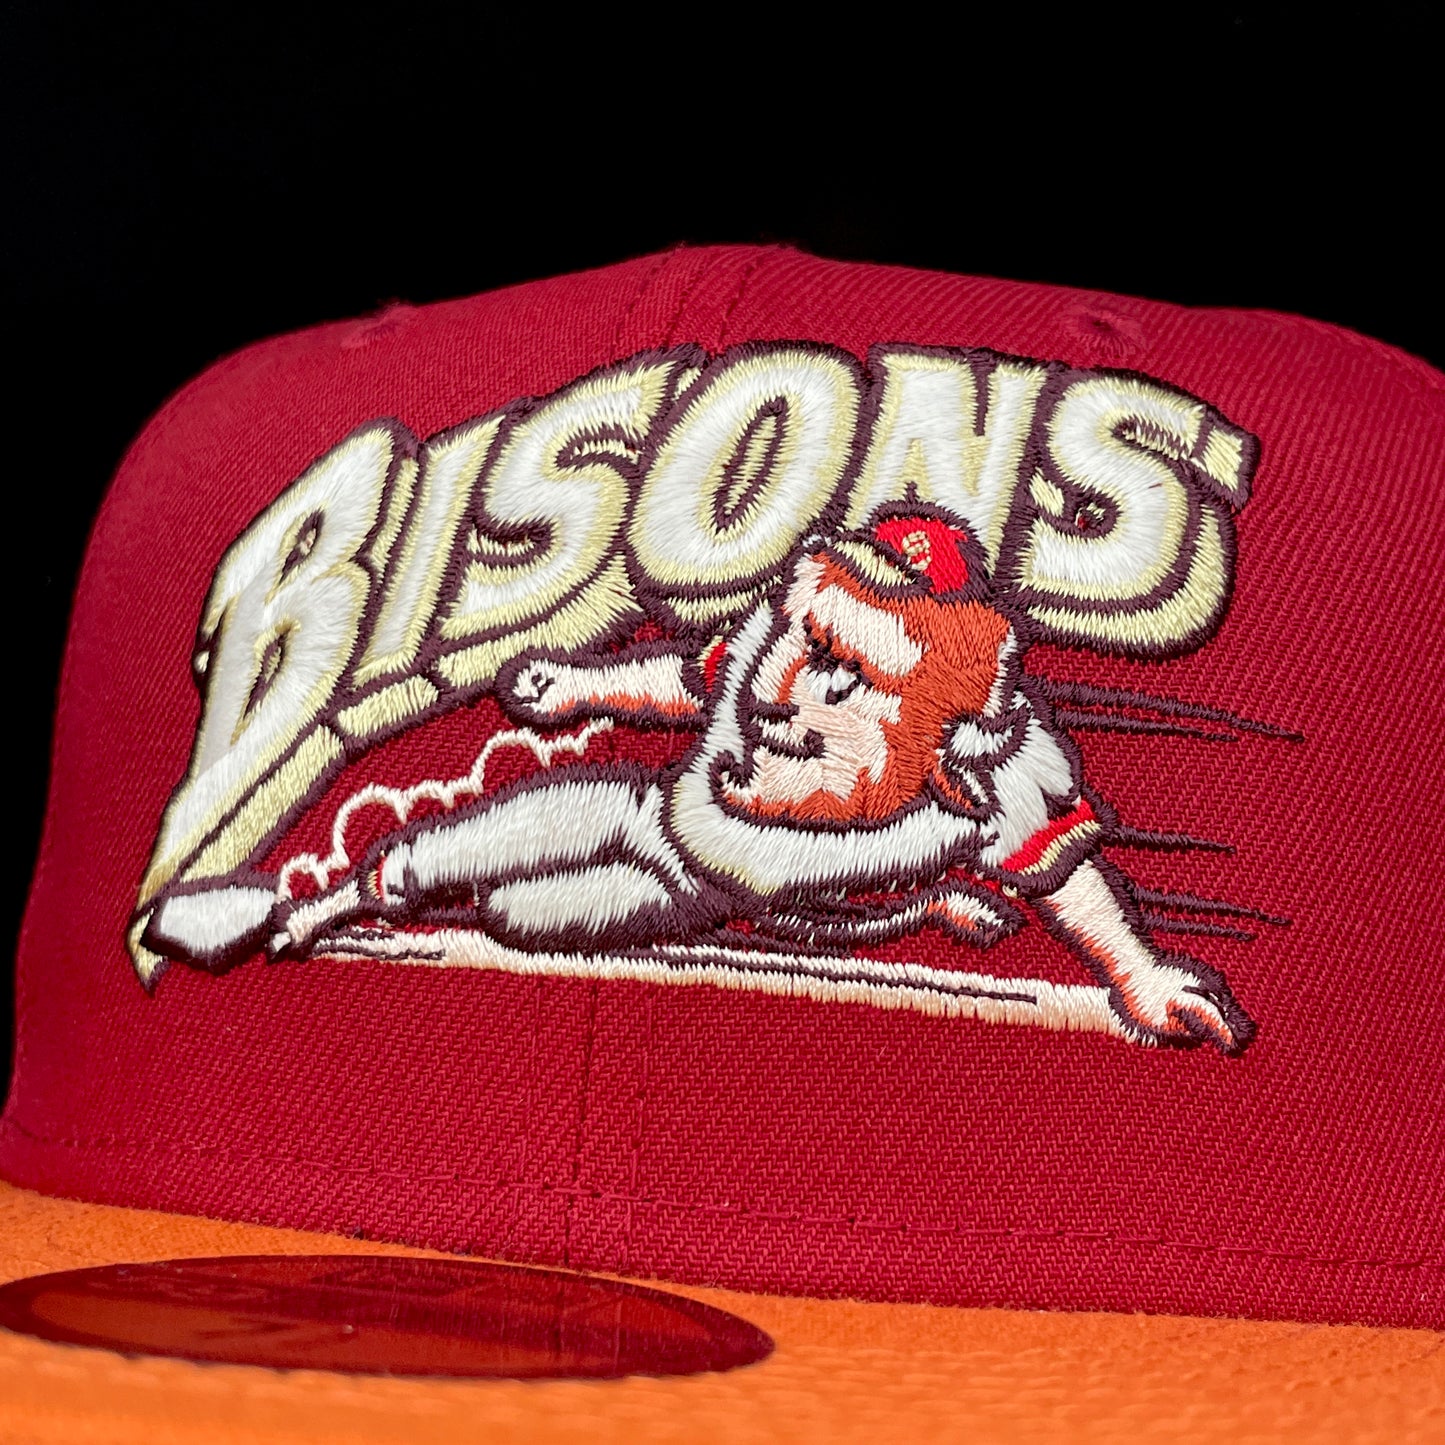 Bisons “Fire Element”